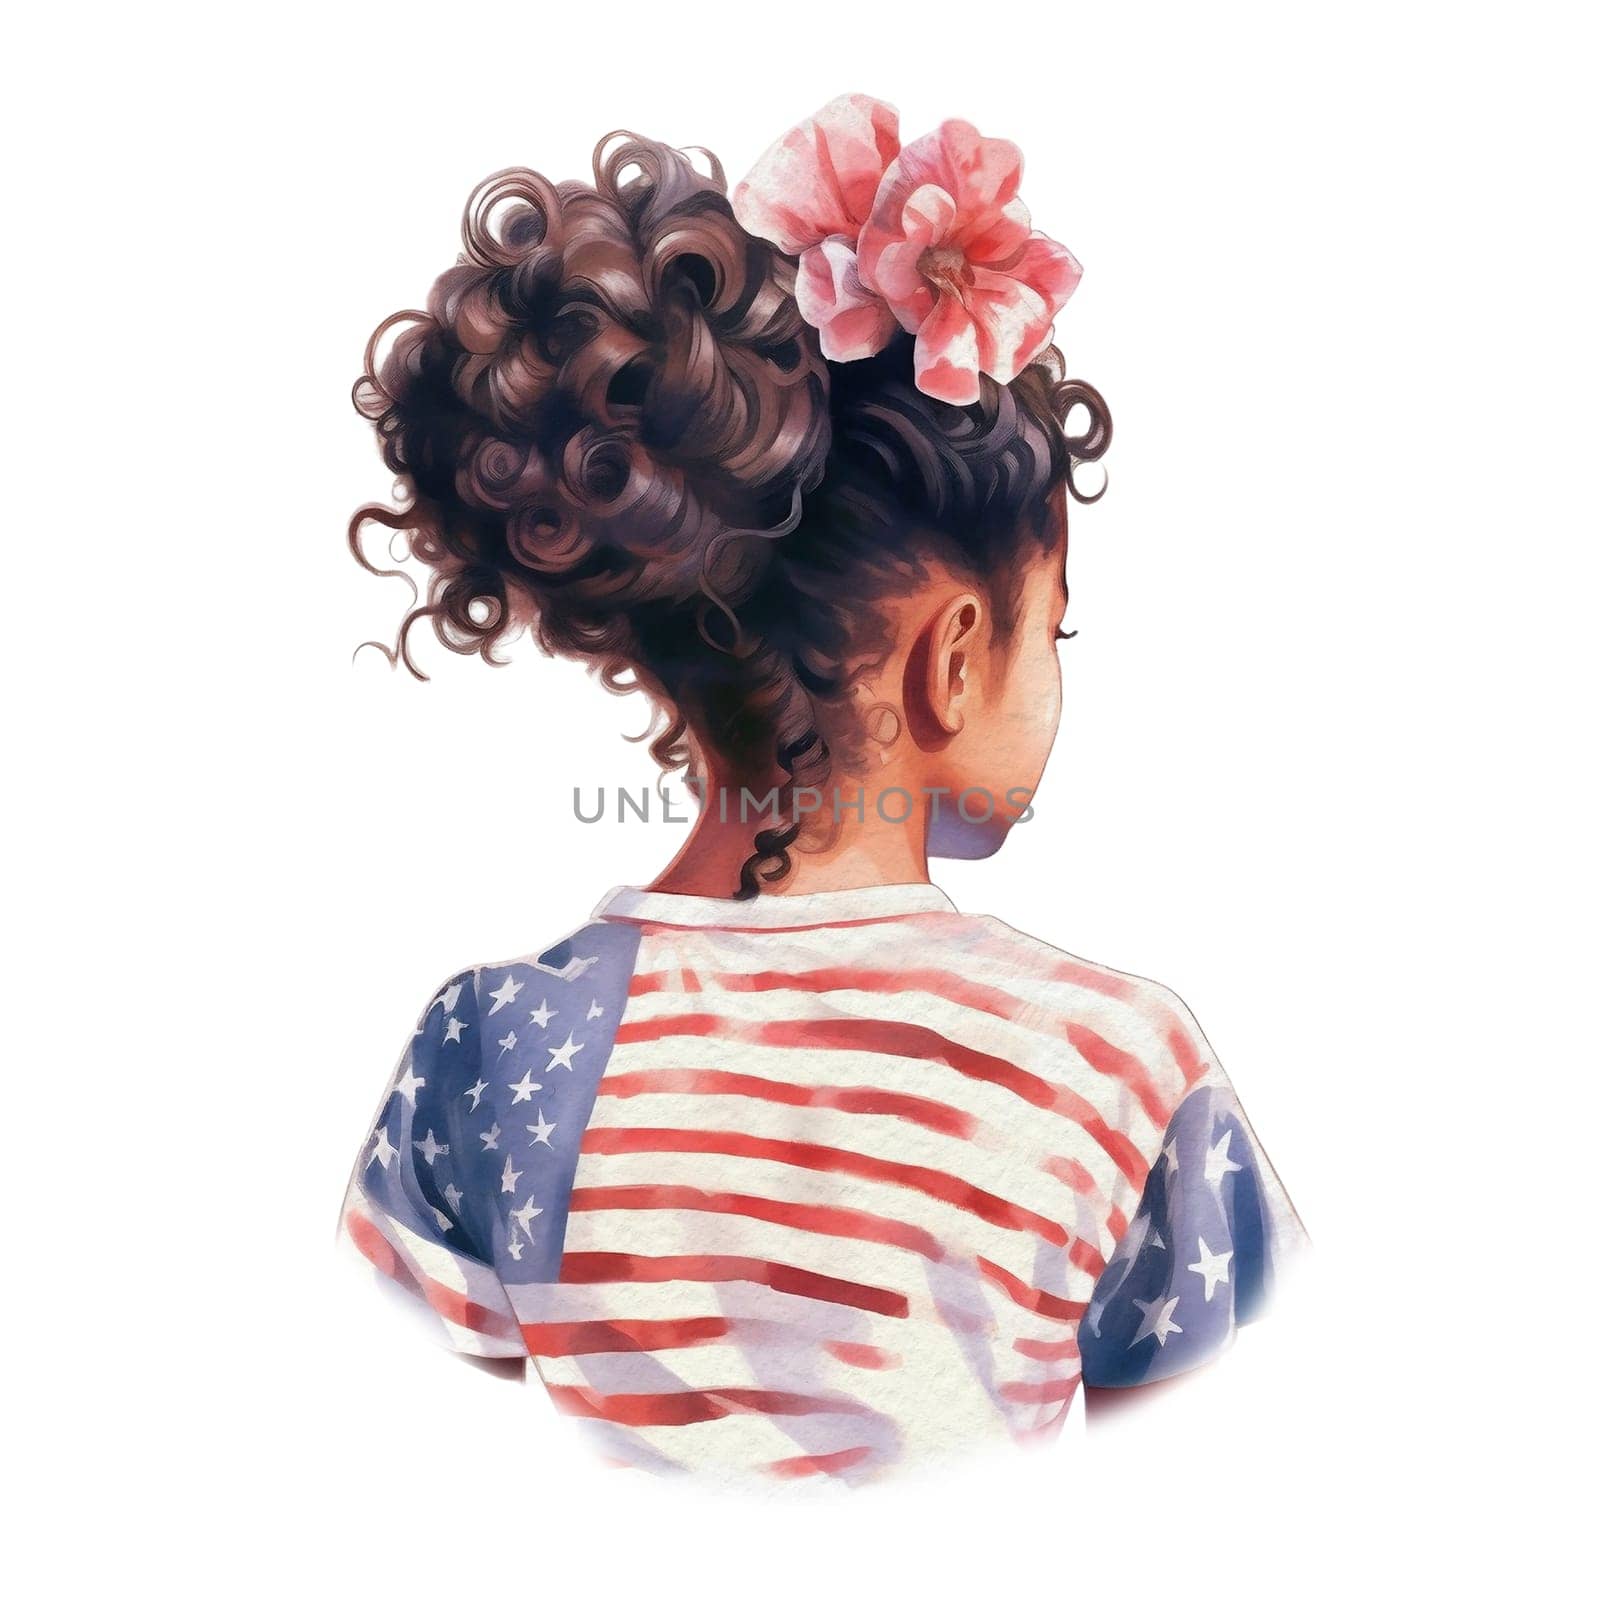 Watercolor American Messy Bun. Cute Afro American Girl with 4th of July accessories Illustration Clipart by Skyecreativestudio